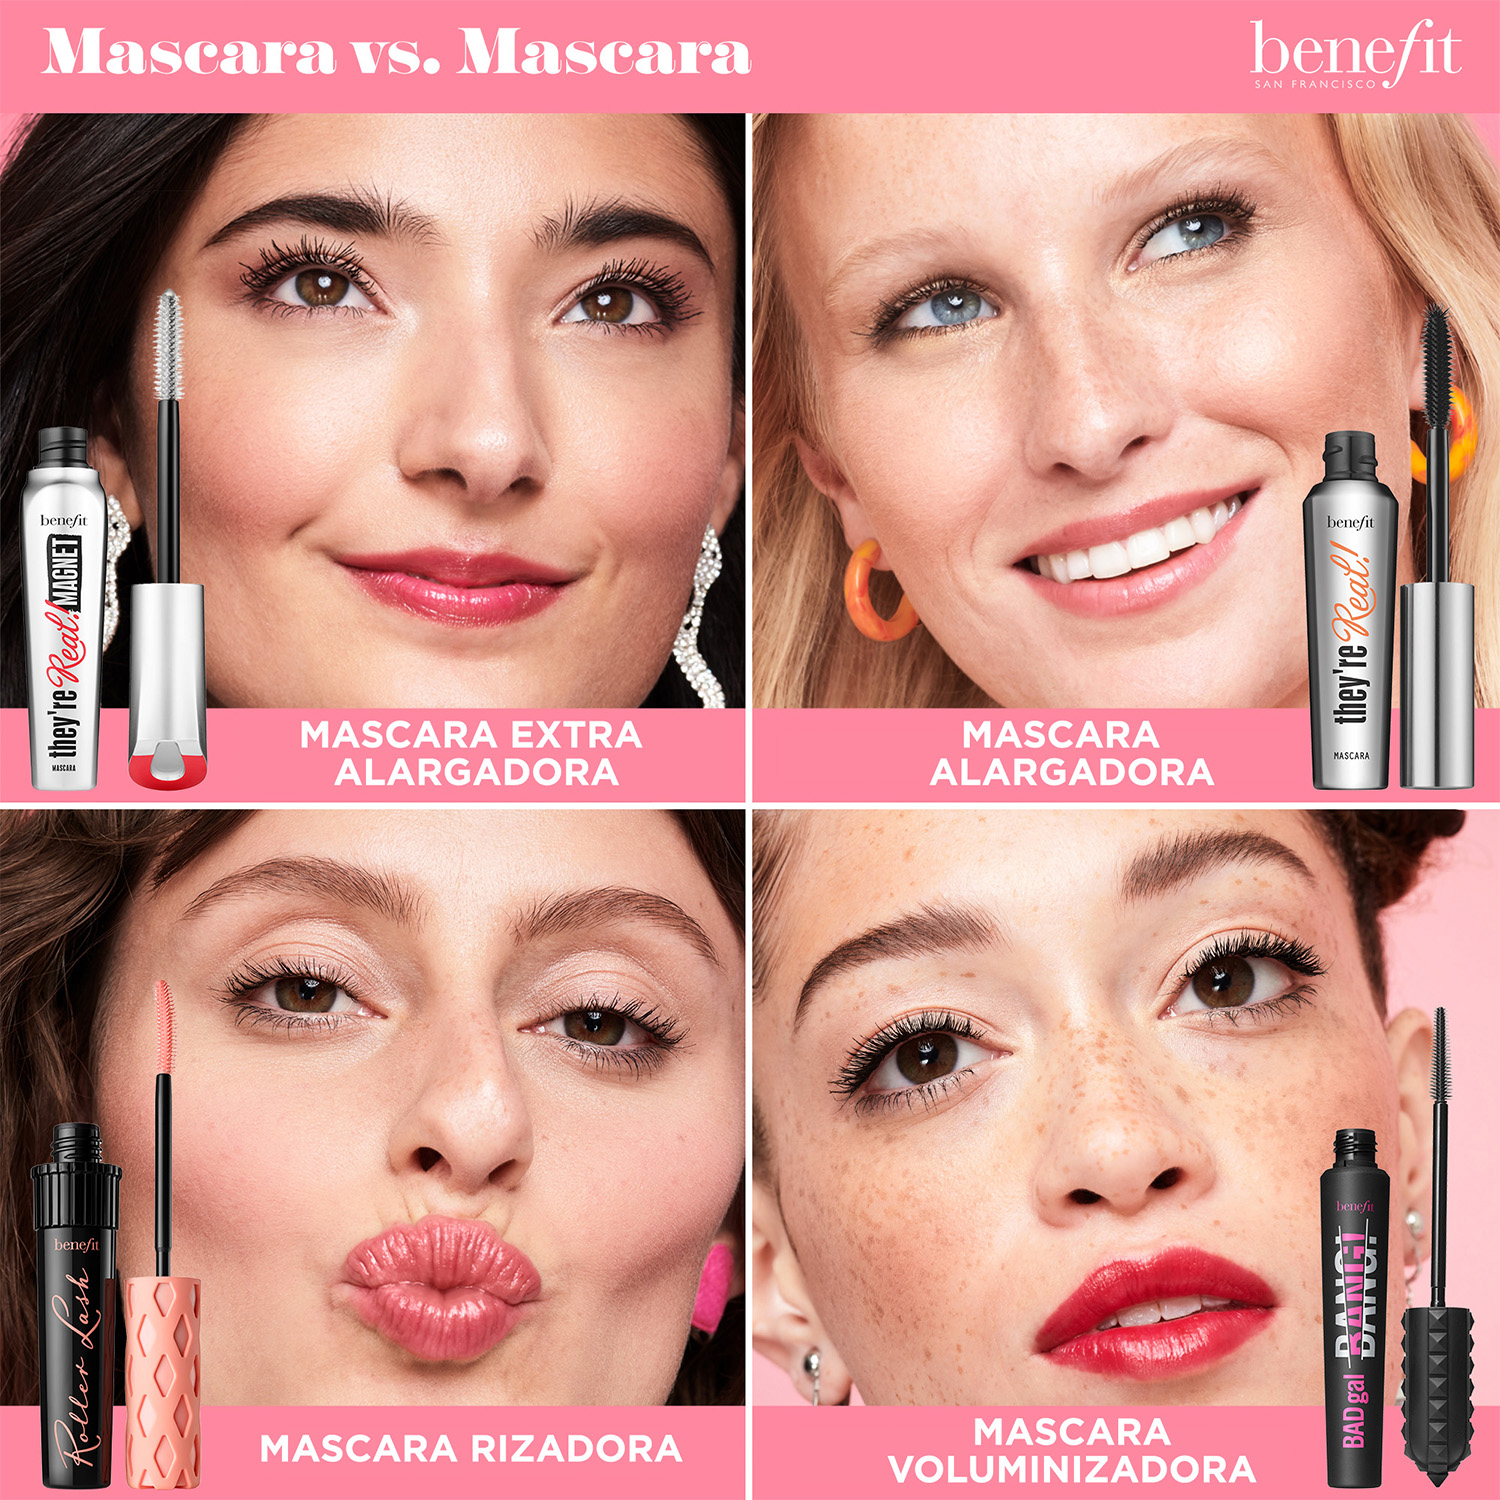 THEY'RE REAL! MASCARA